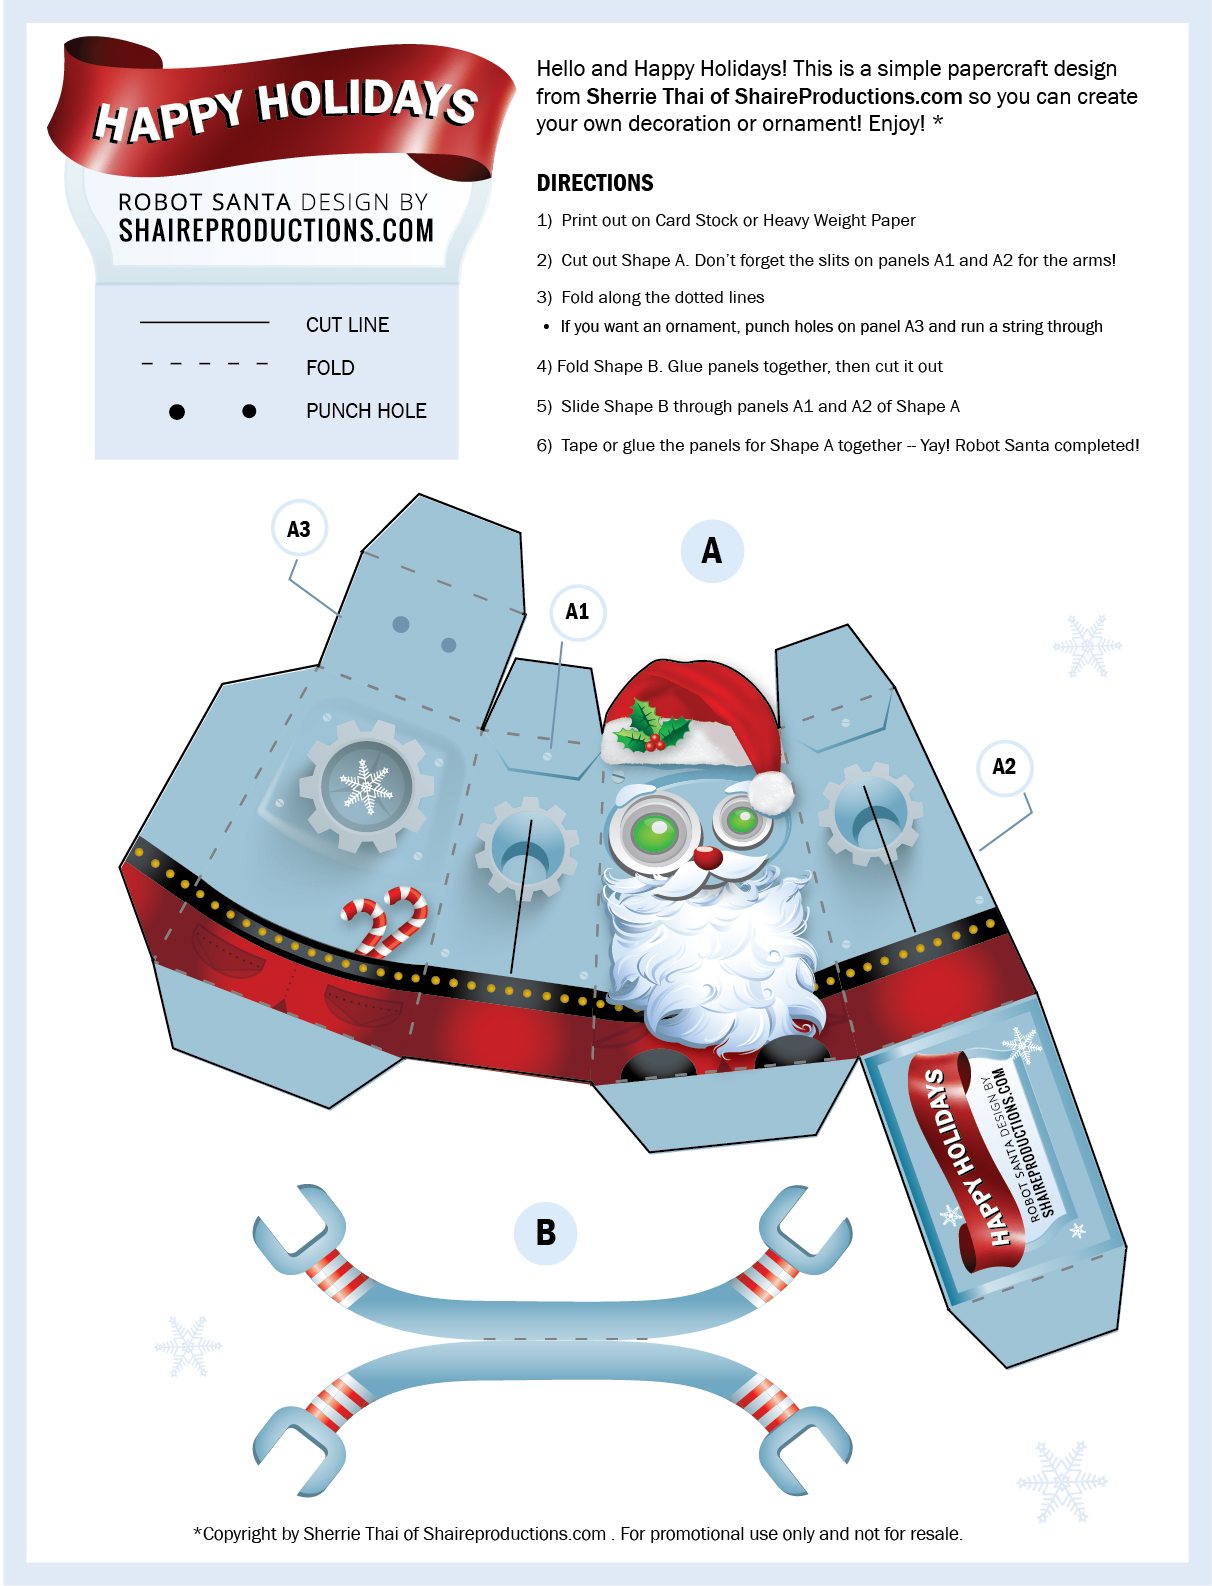 Free Download: Robot Santa Christmas Papercraft | Shaire Productions